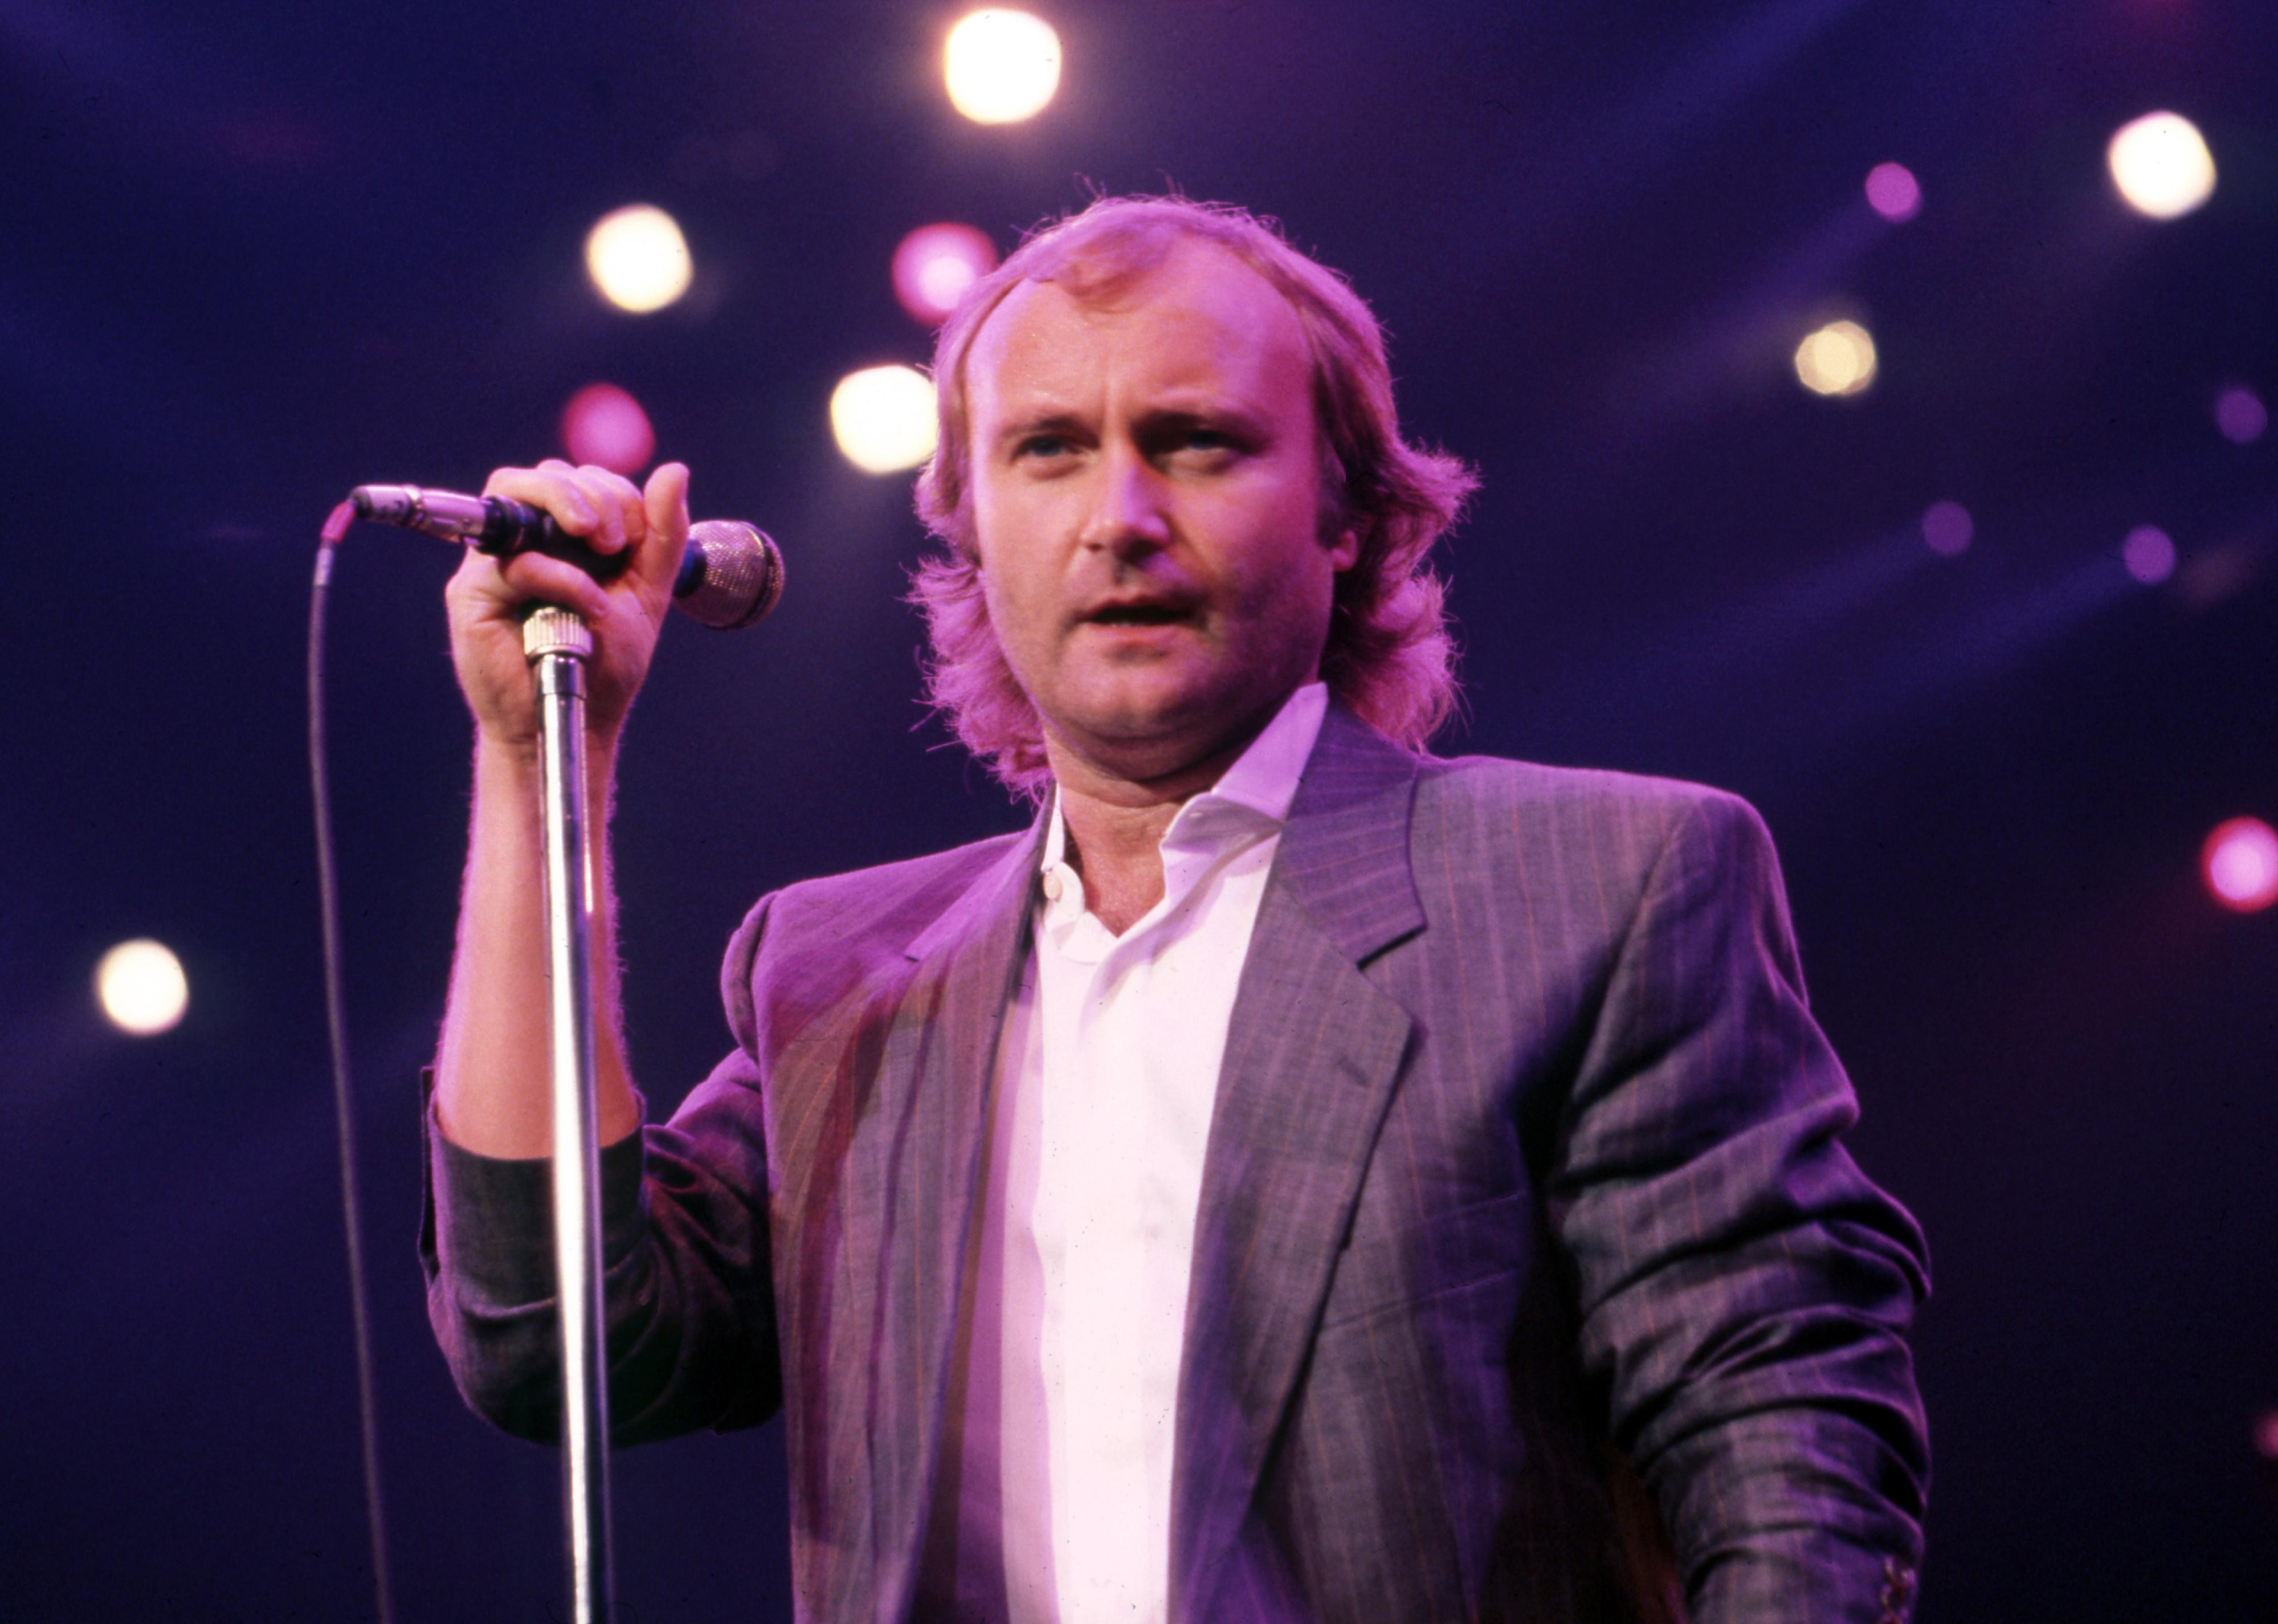 Phil Collins performing on stage.